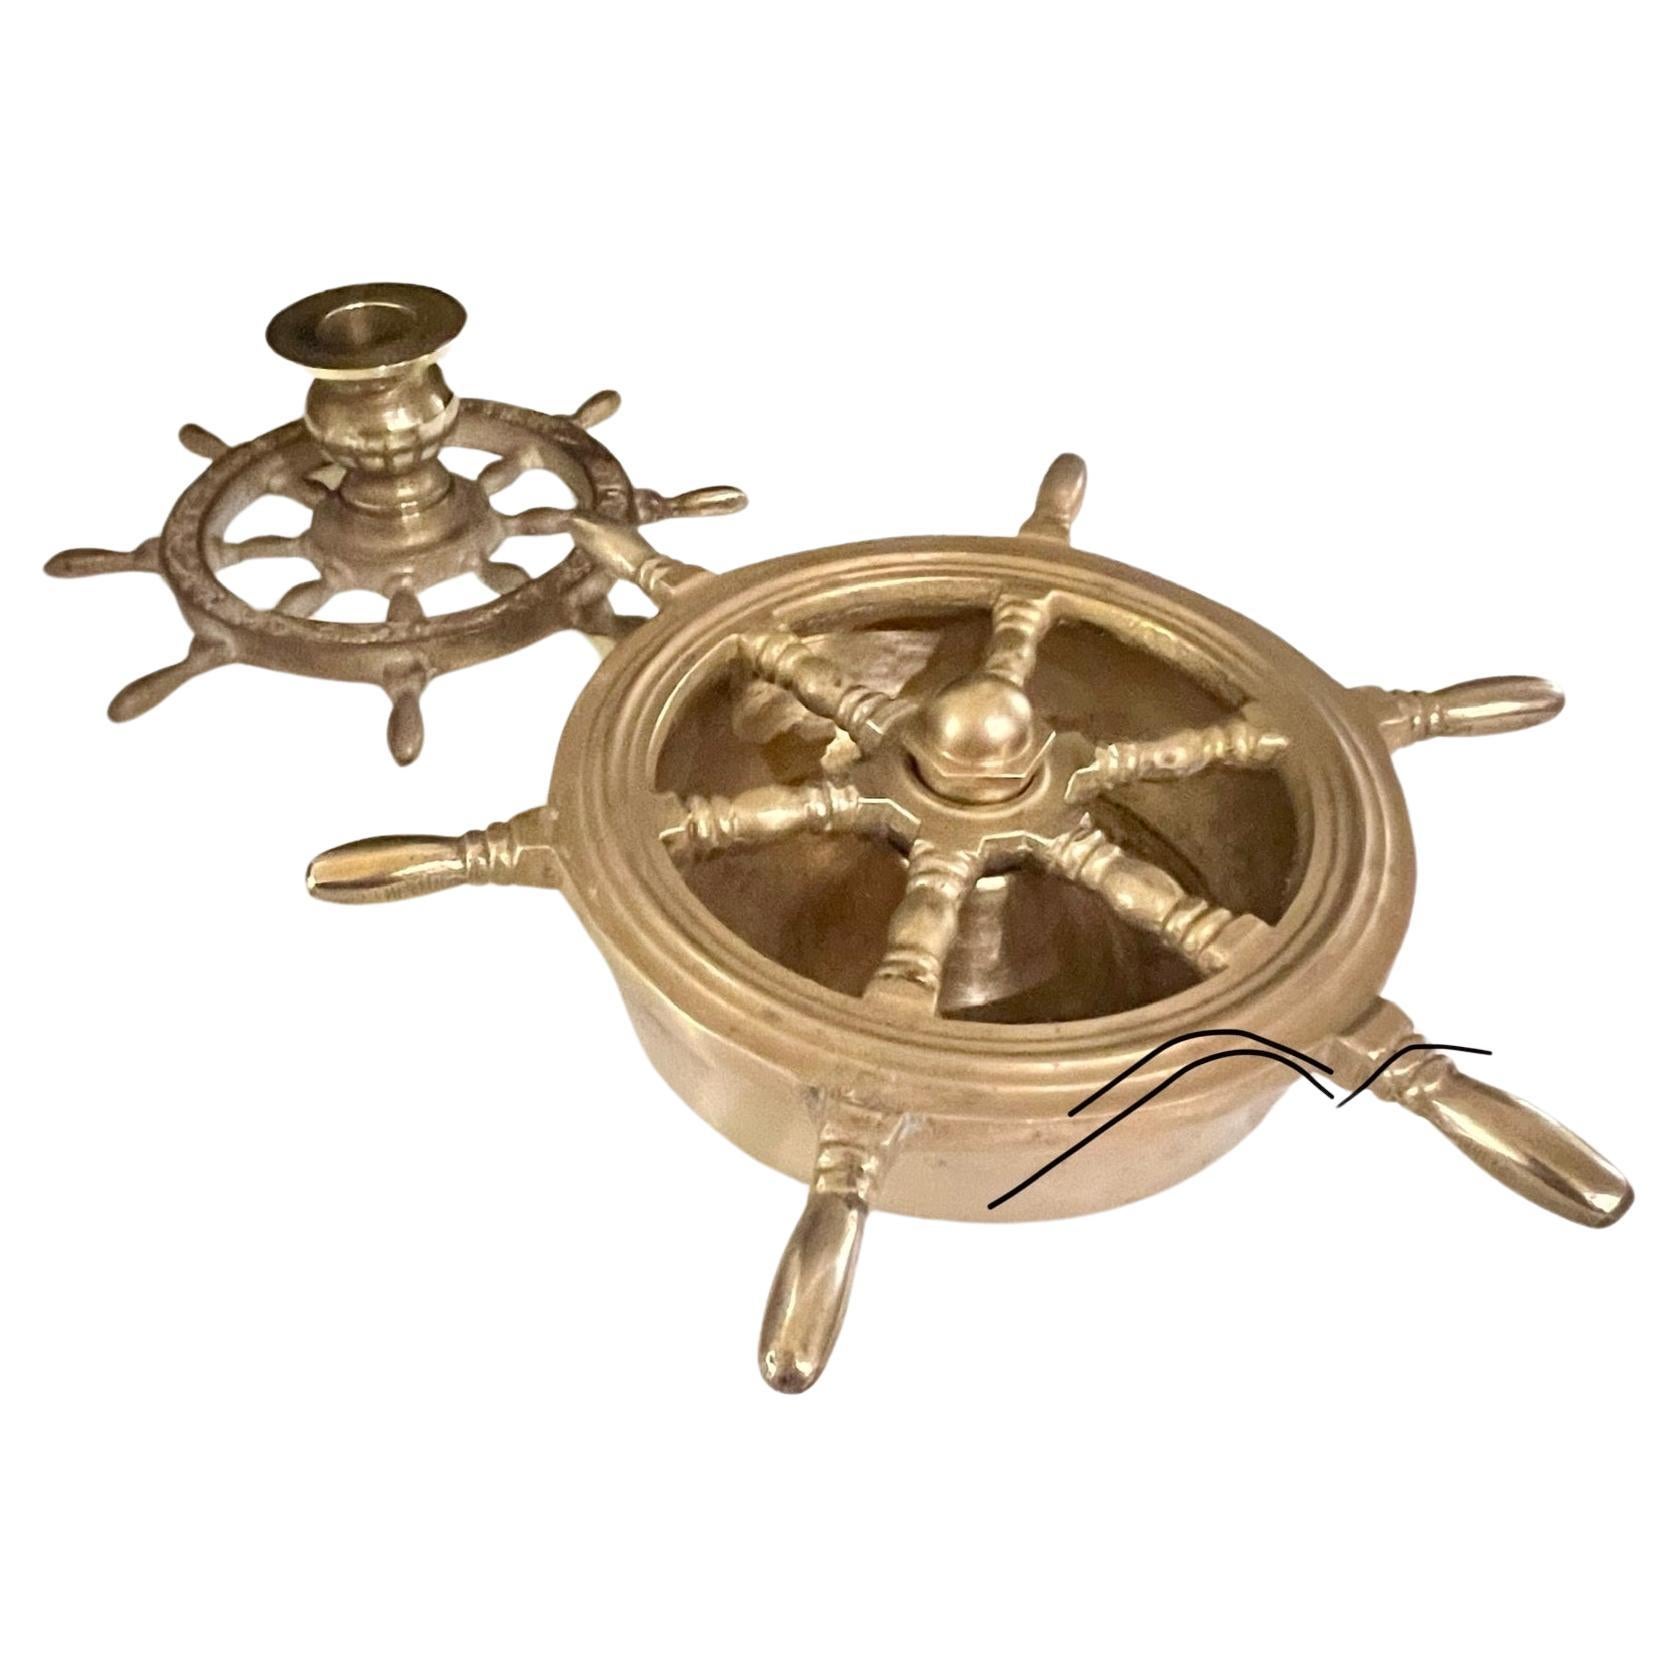 Whimsical Solid Brass Nautical Candle Holder & Ashtray Steering Wheel